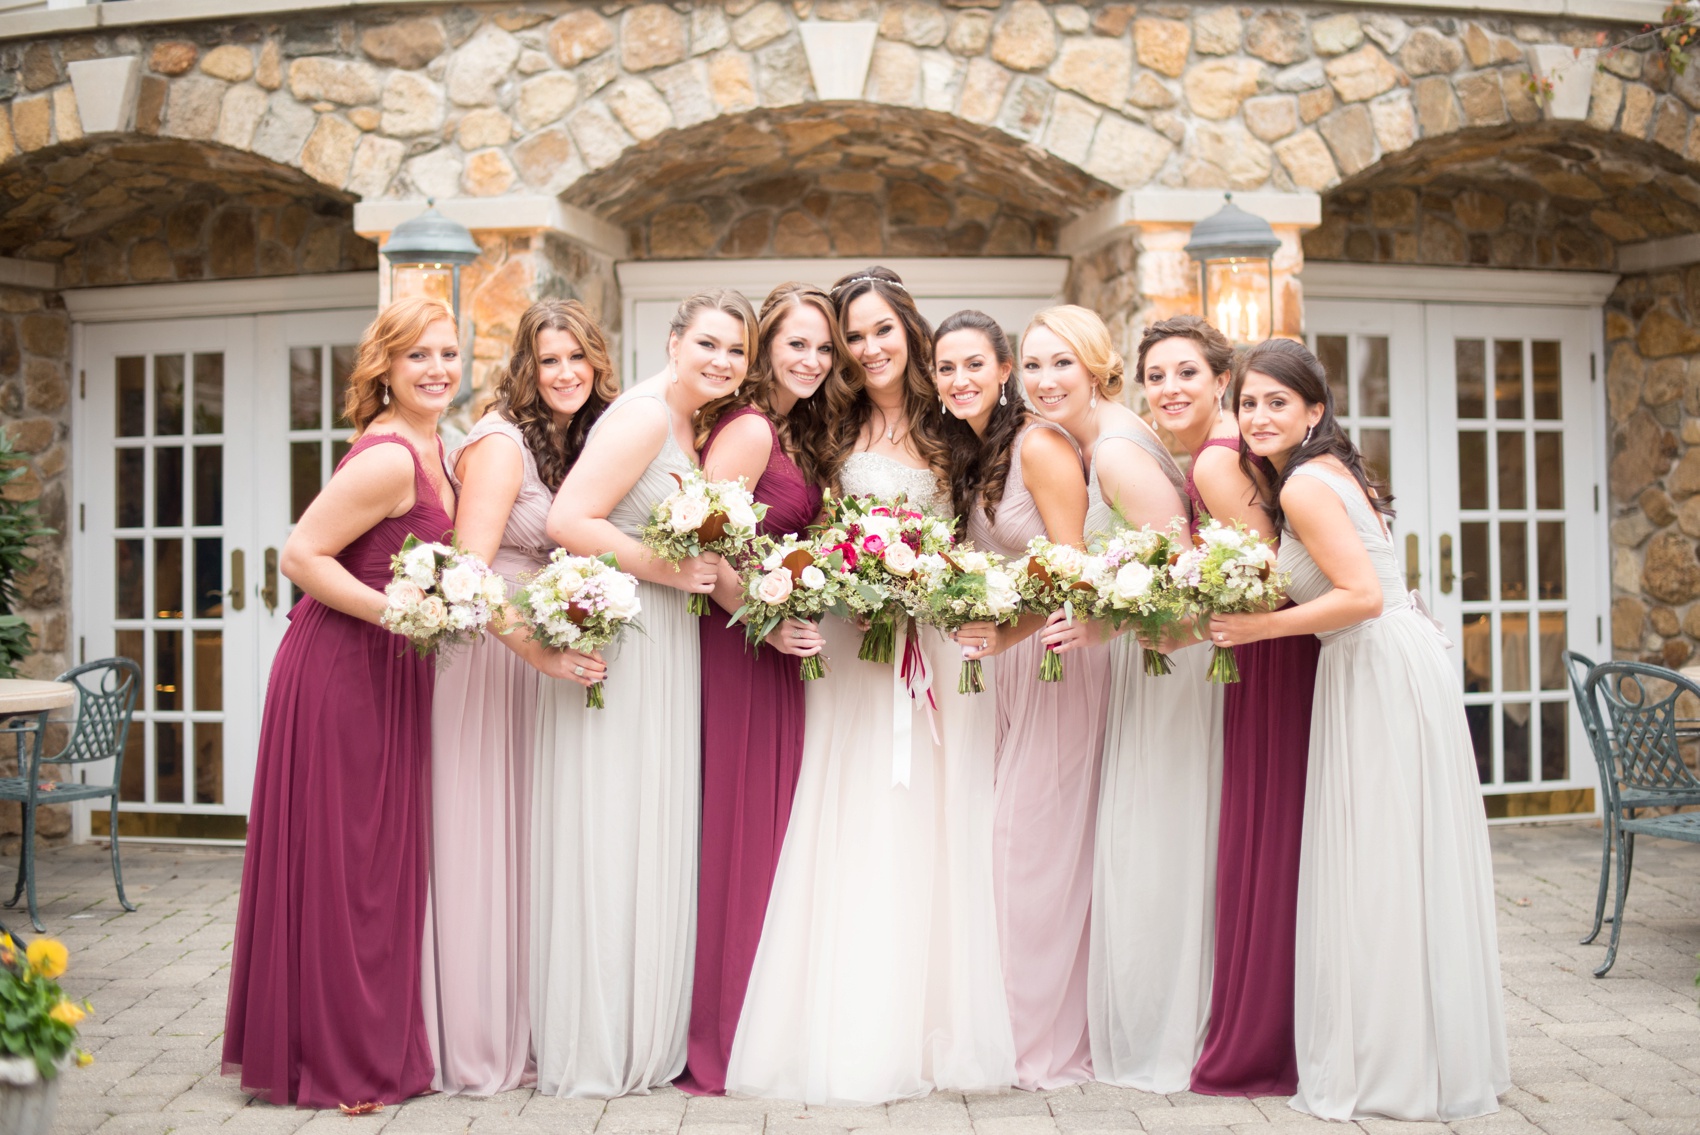 Olde Mill Inn New Jersey wedding by Mikkel Paige Photography, NYC and Raleigh wedding photographer. Bridal wedding party fall photos with burgundy, grey and dusty rose gowns.